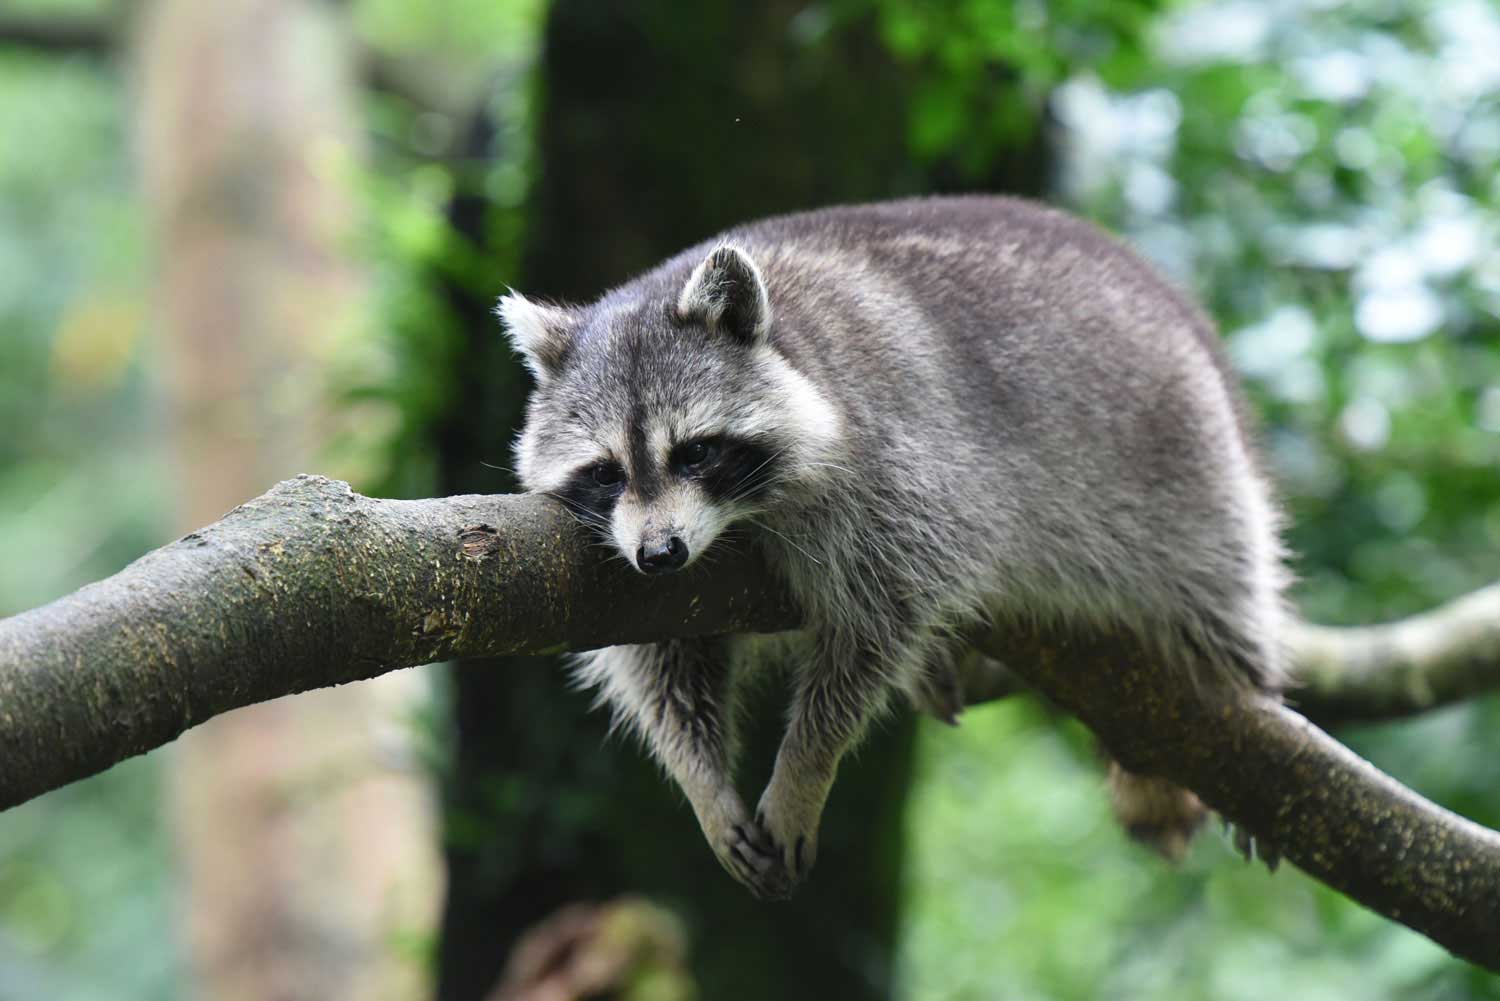 A raccoon laying on a tree branch.